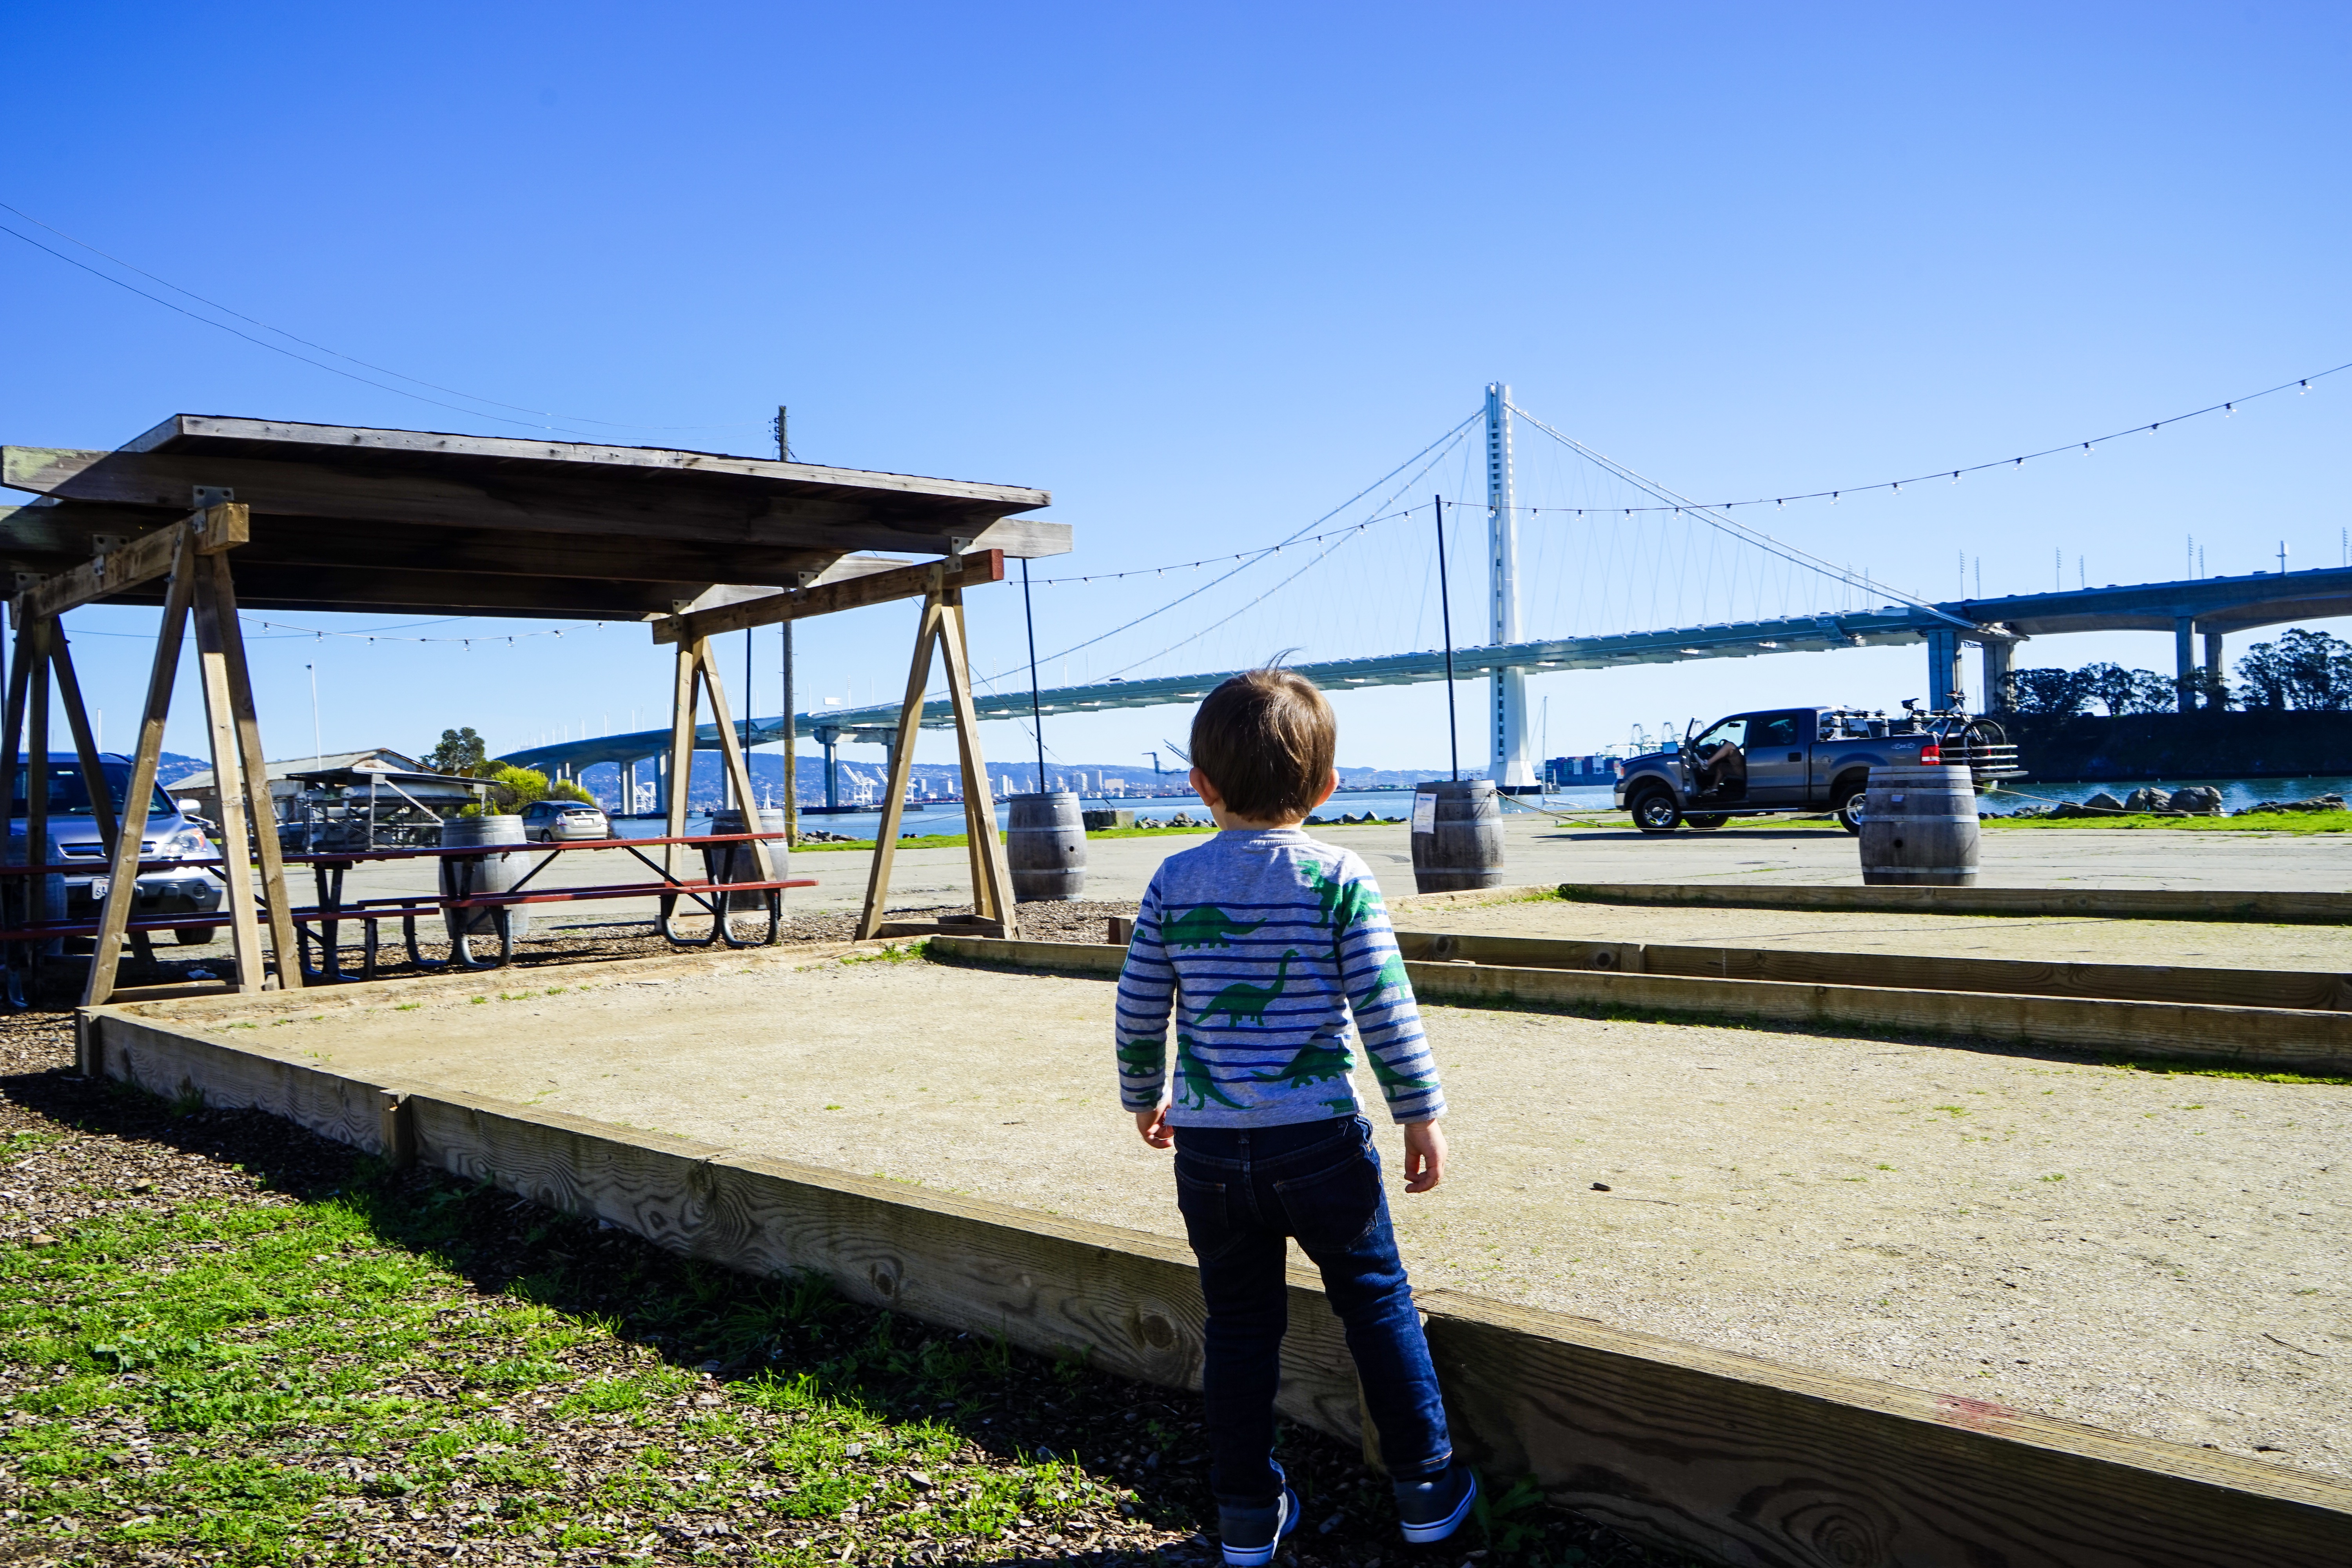 Ultimate List of Kid-Friendly Wineries on Treasure Island | San Francisco with Kids | Family Friendly Wineries | Henry and Andrew’s Guide (www.henryandandrewsguide.com) 